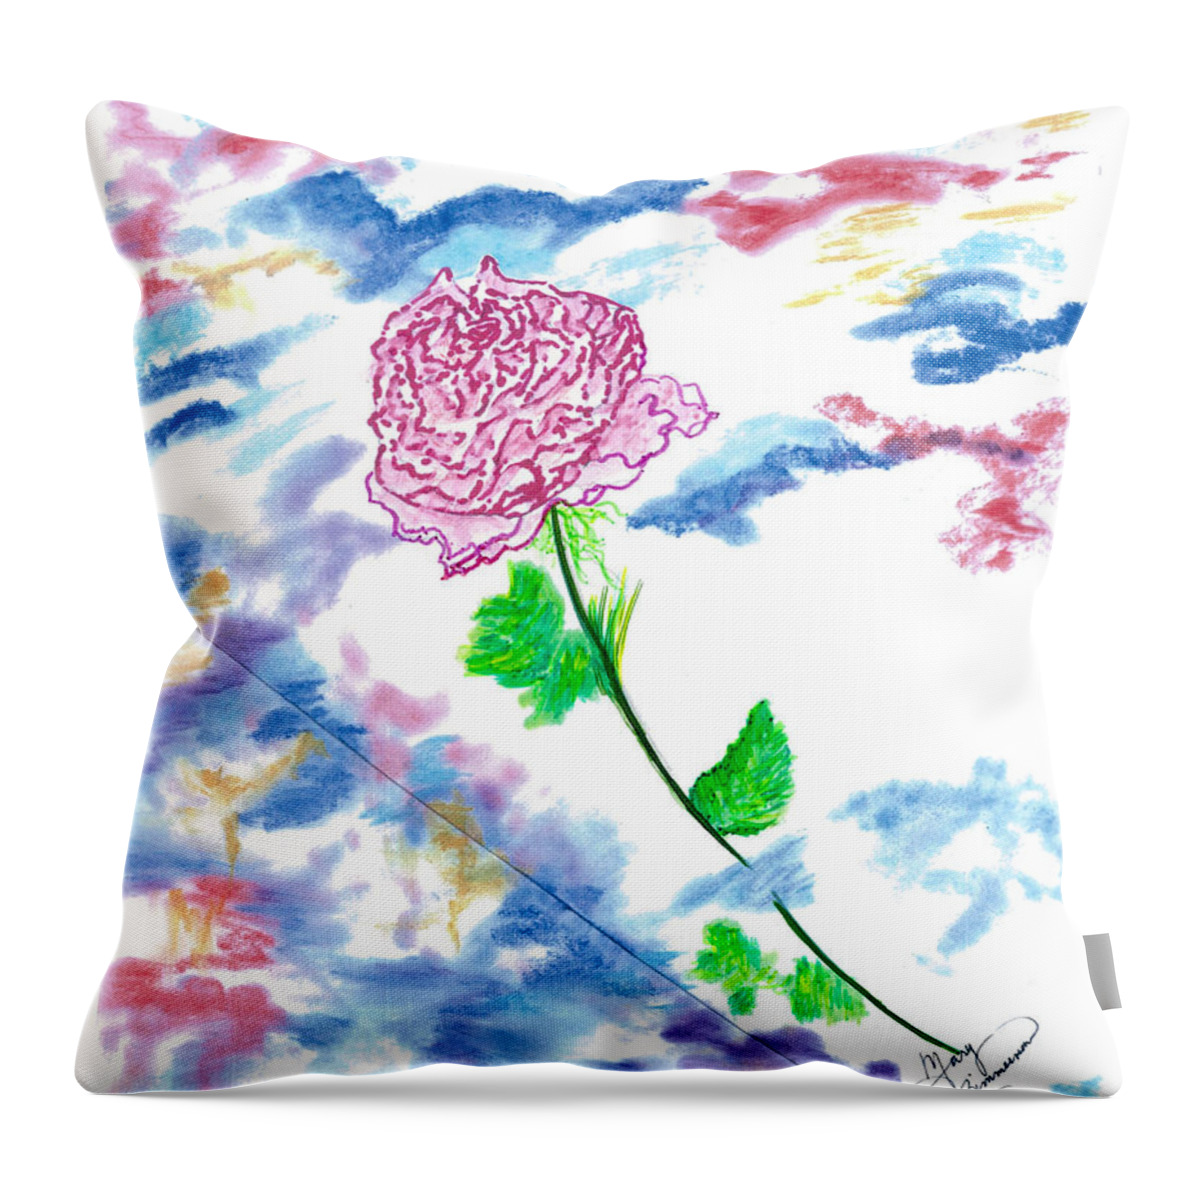 Flowers Throw Pillow featuring the painting Celestial Rose by Mary Zimmerman